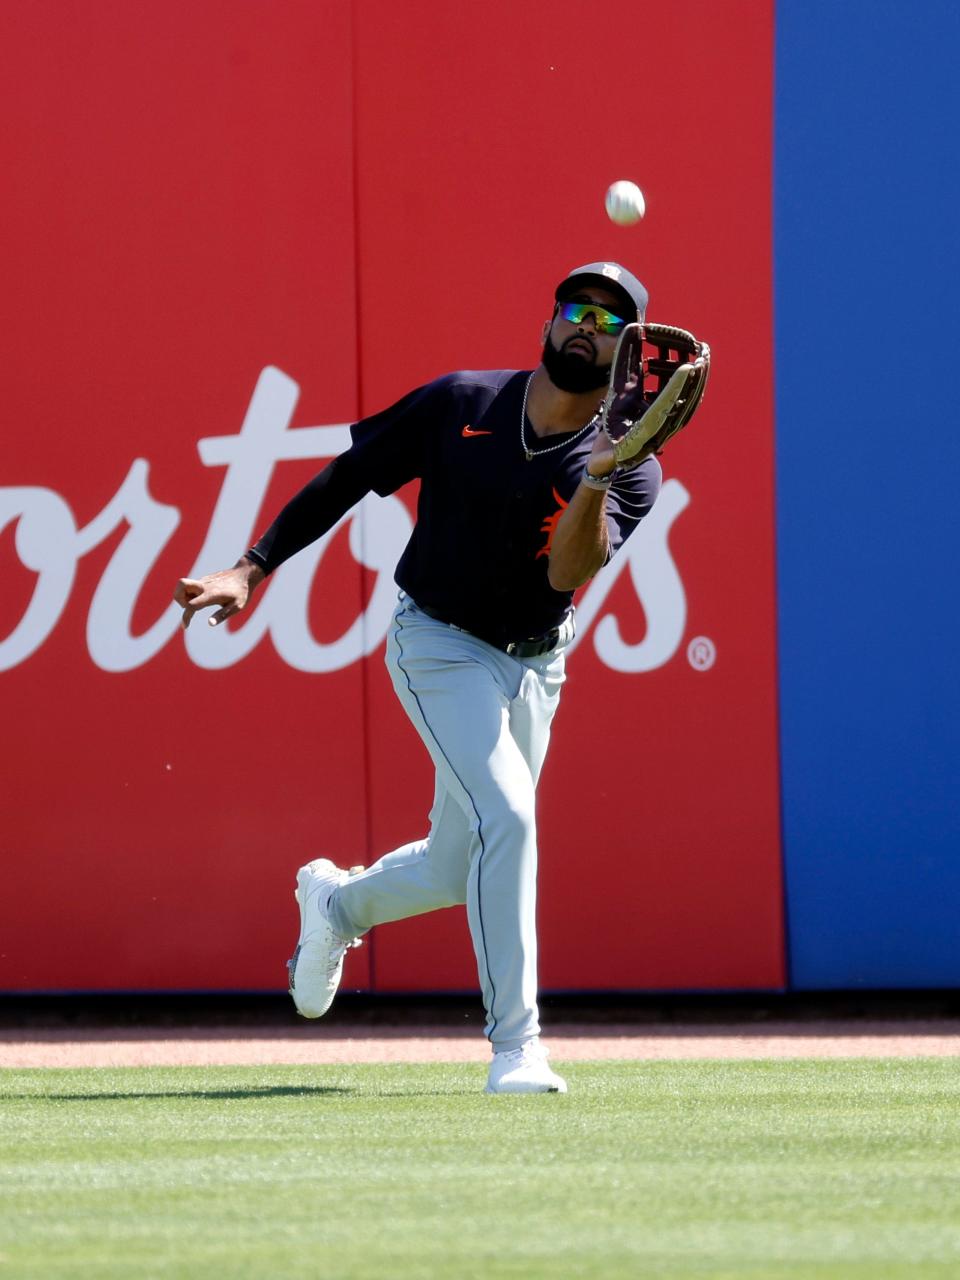 Detroit Tigers center fielder Derek Hill (54) catches a fly ball during the second inning of a spring training game  against the Toronto Blue Jays on March 11, 2021, at TD Ballpark in Dunedin, Florida.